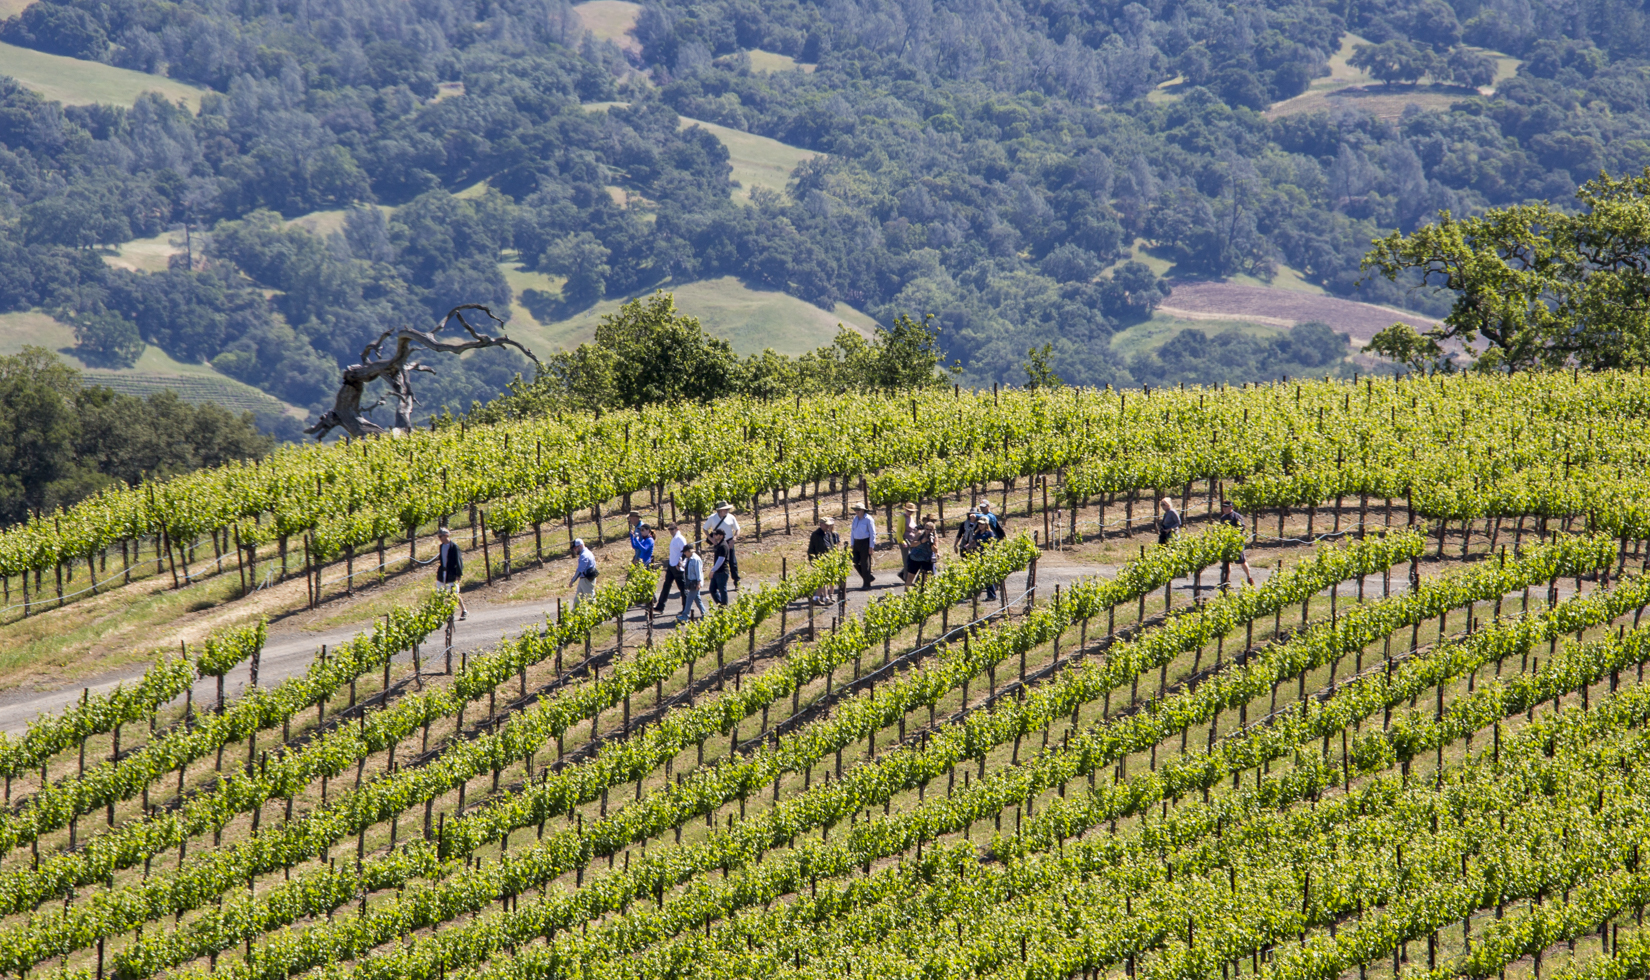 Distance shot of people walking a trail through a sea of vineyards. Oak trees scatter the hills in the back.